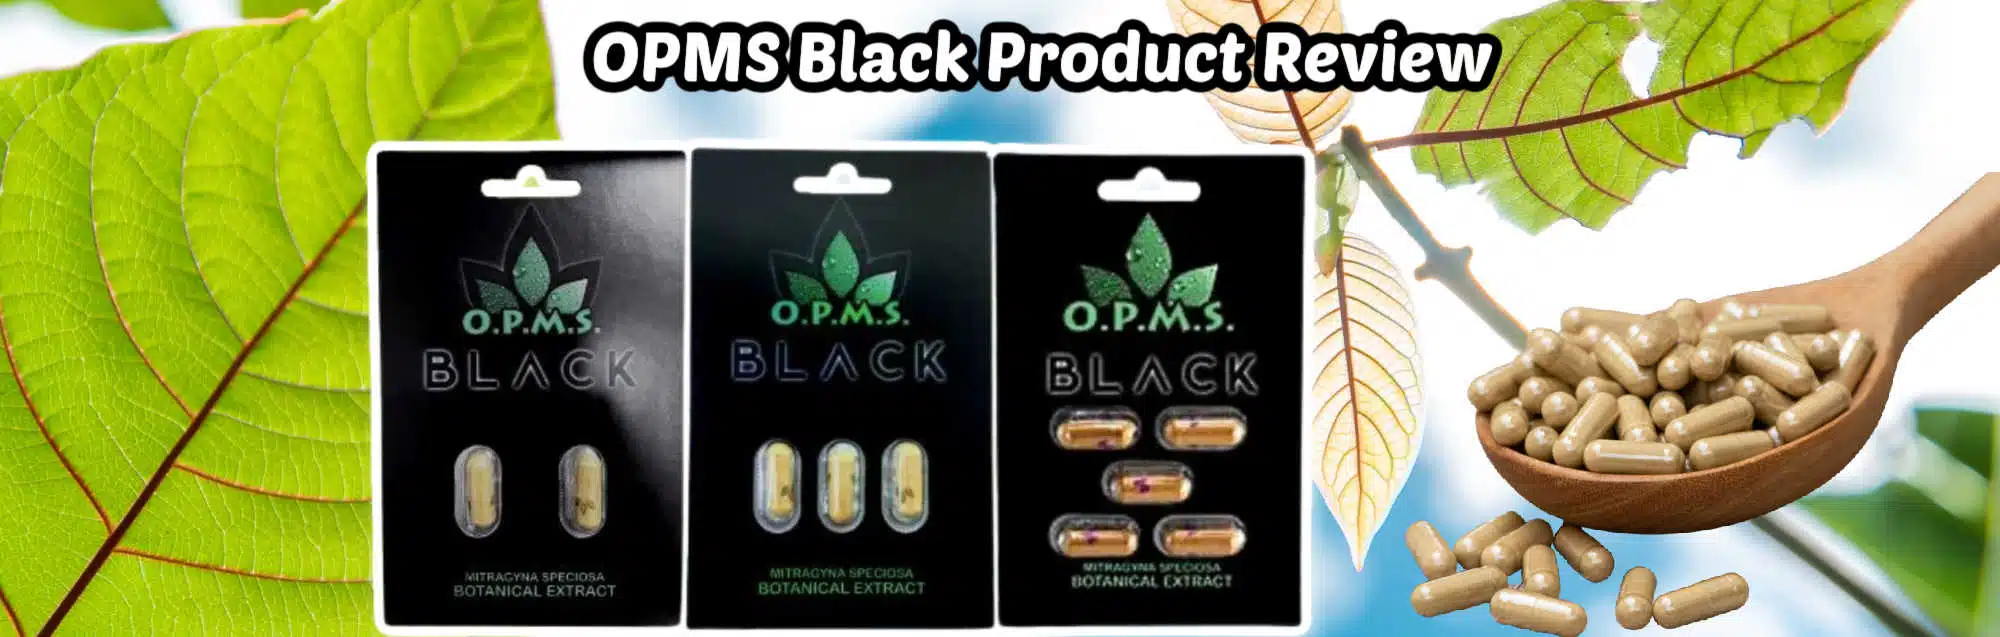 OPMS black product display and review banner